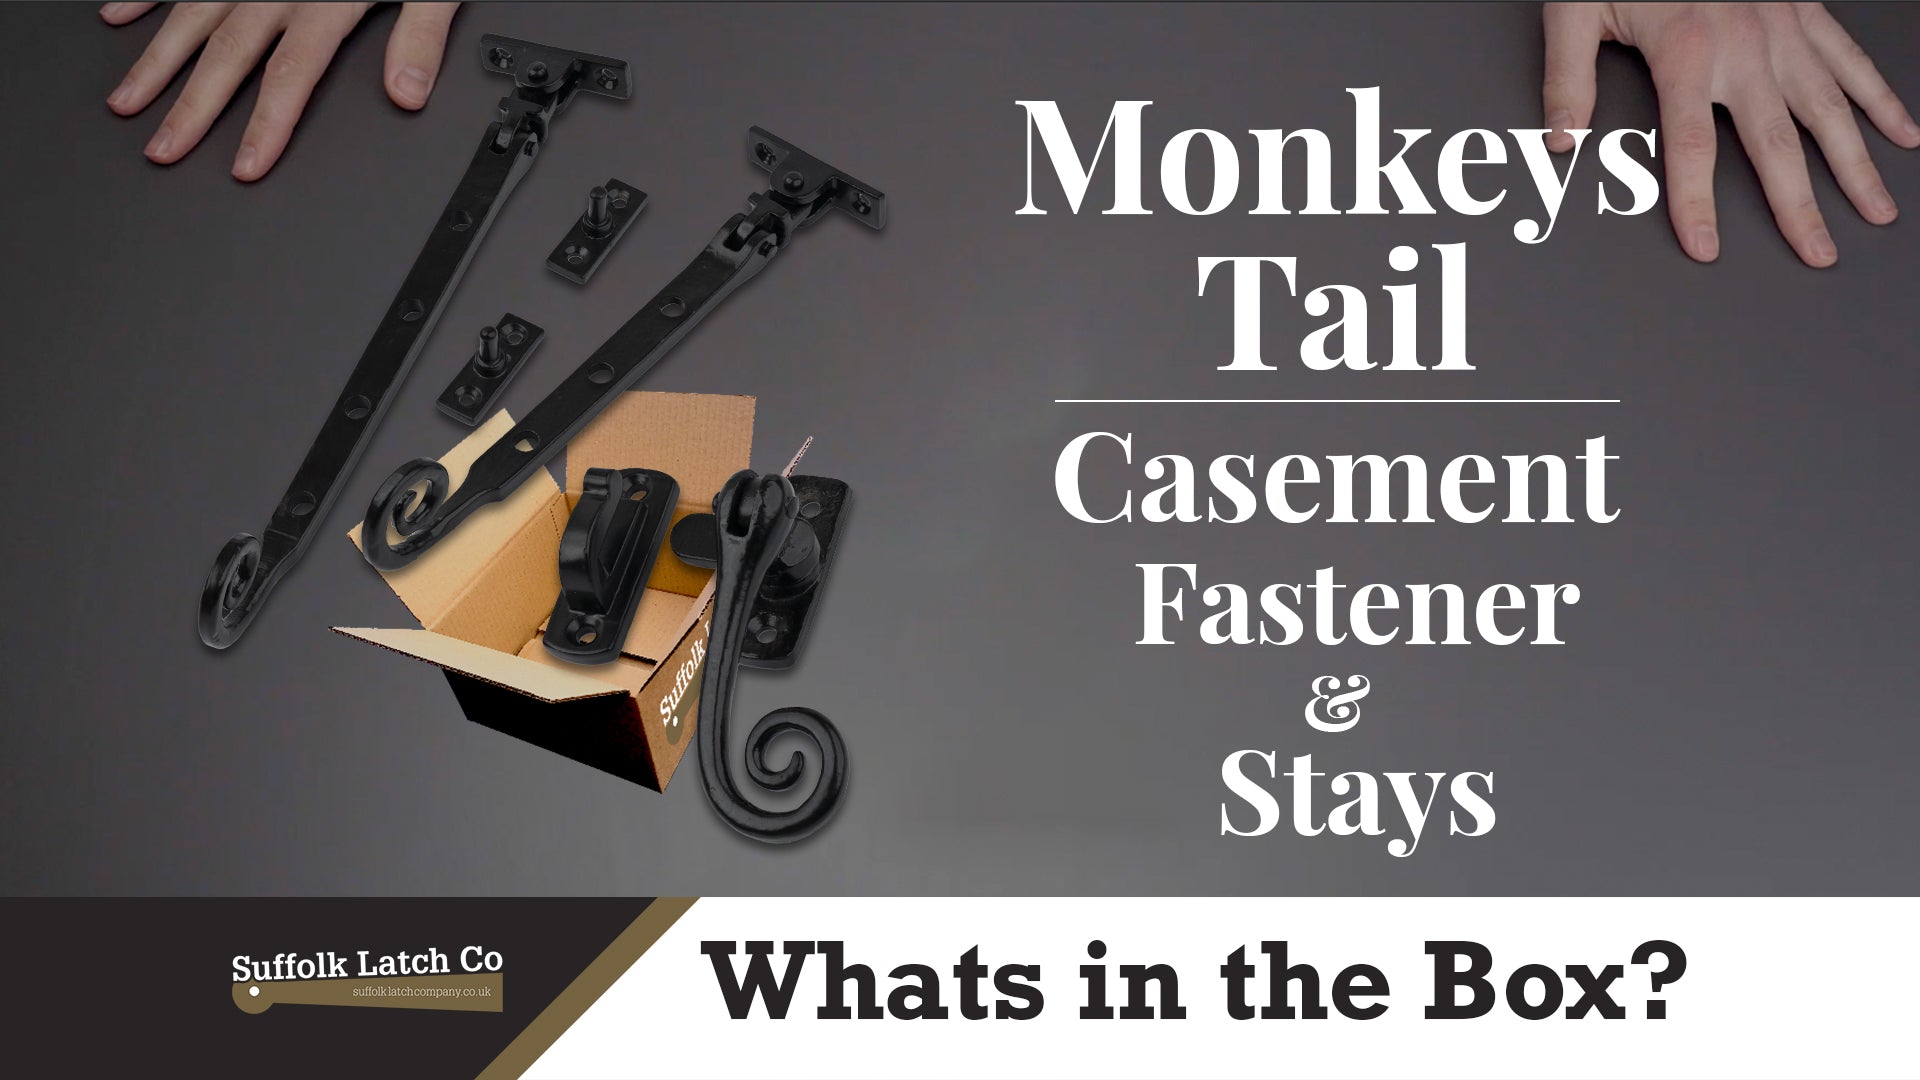 What's In The Box: Black Monkey Tail Window Fastener & Stays